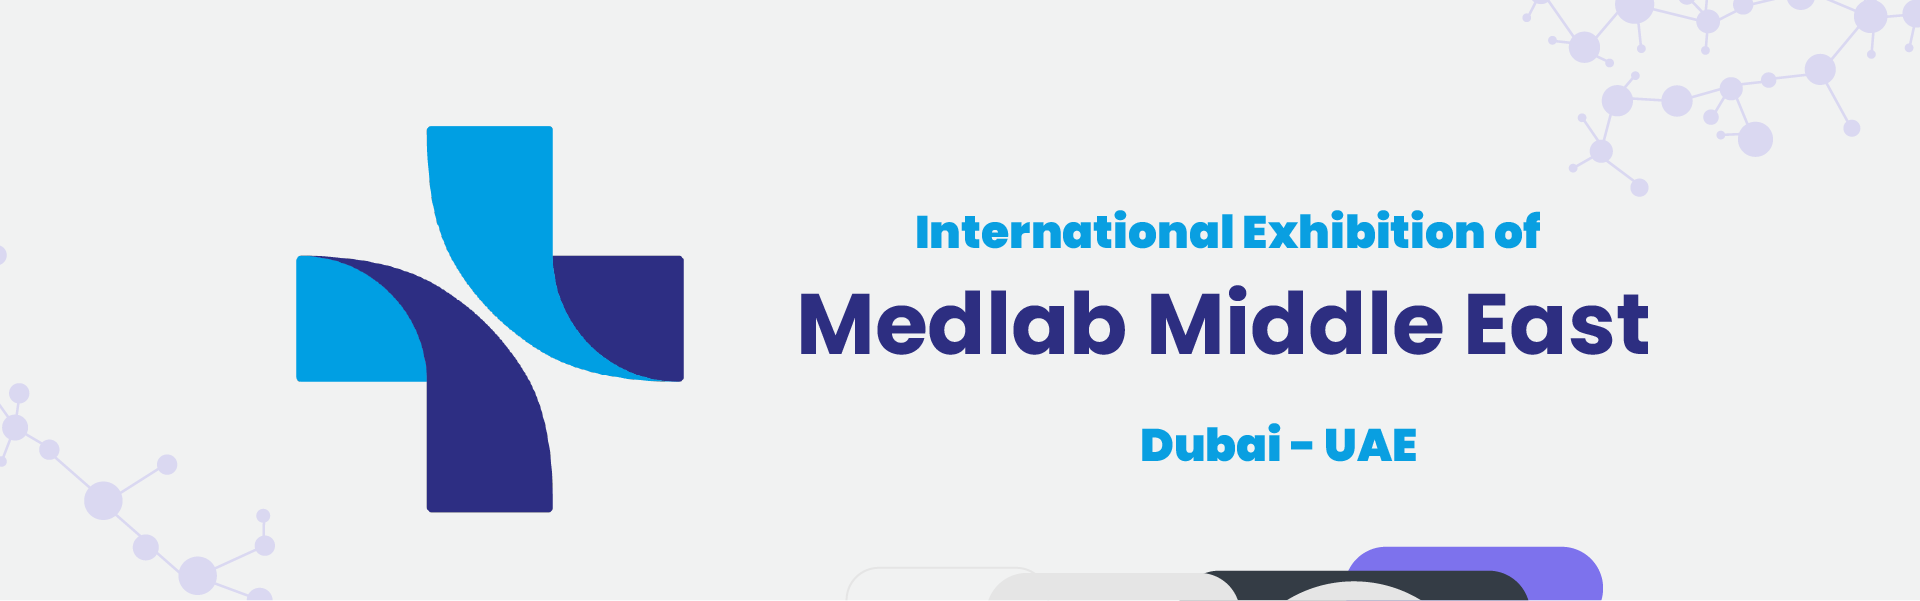 Dubai Exhibition of MEDLAB Middle East